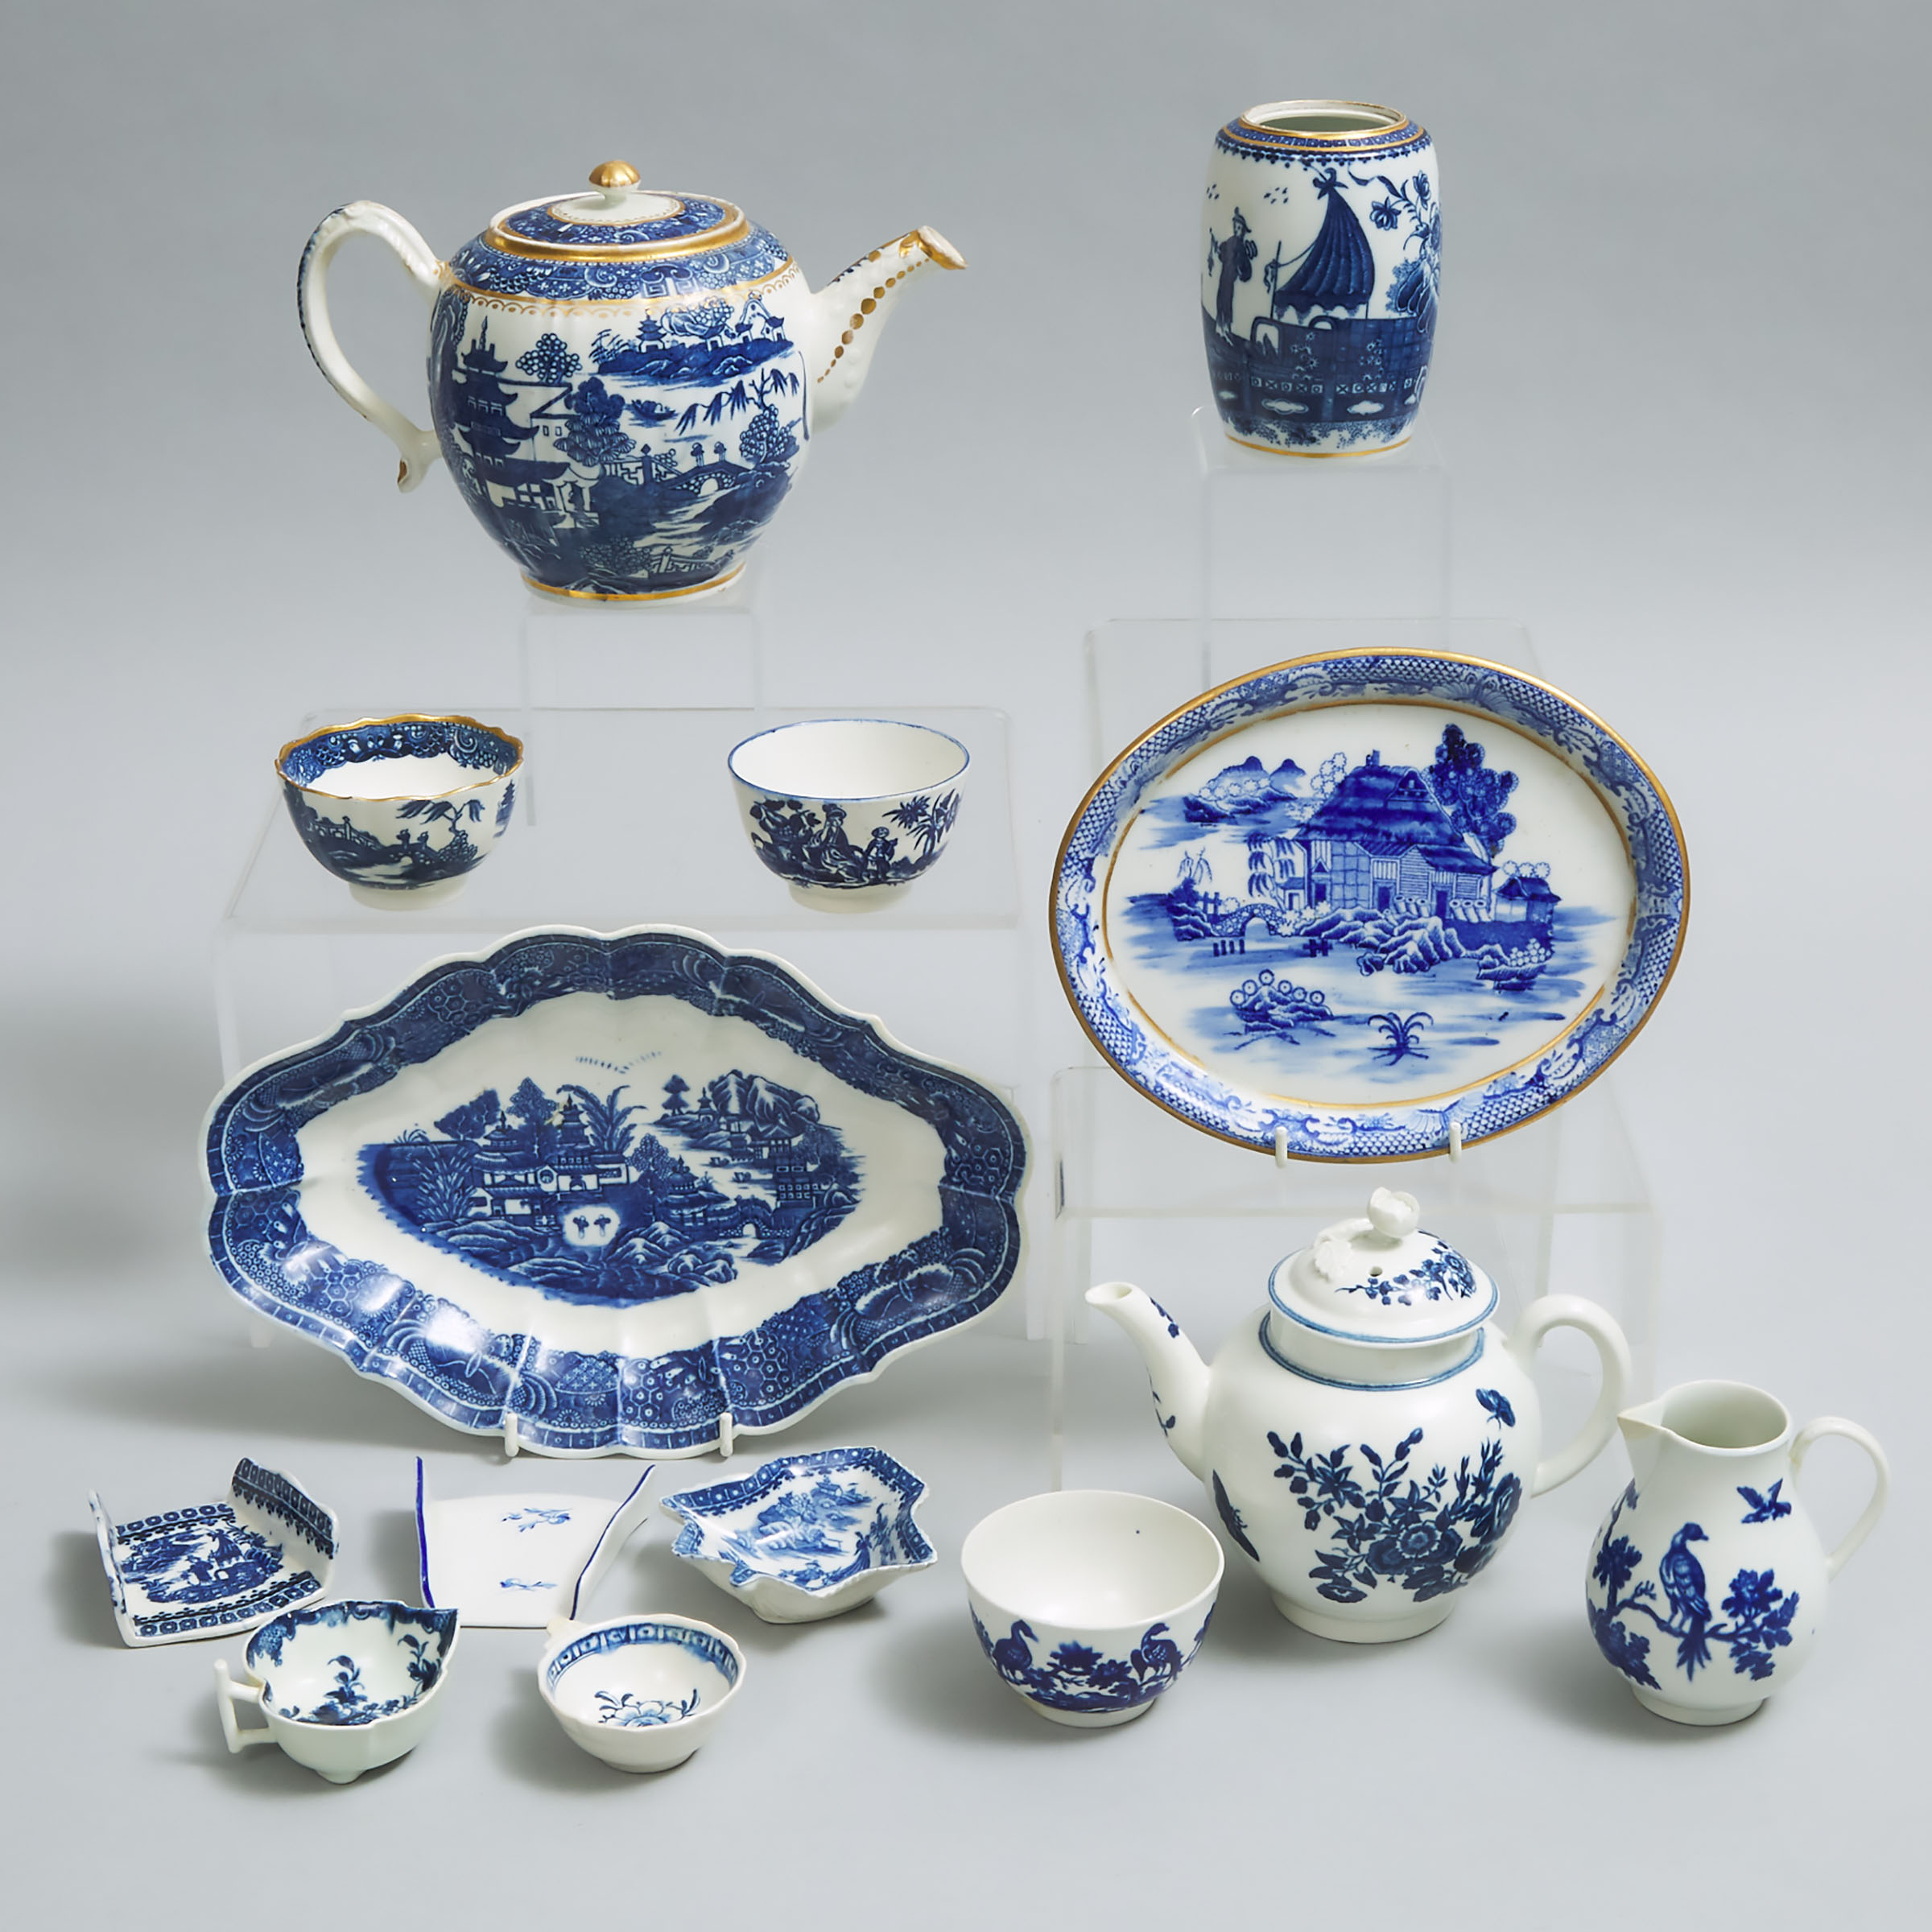 Group of English Blue and White Porcelain, late 18th century